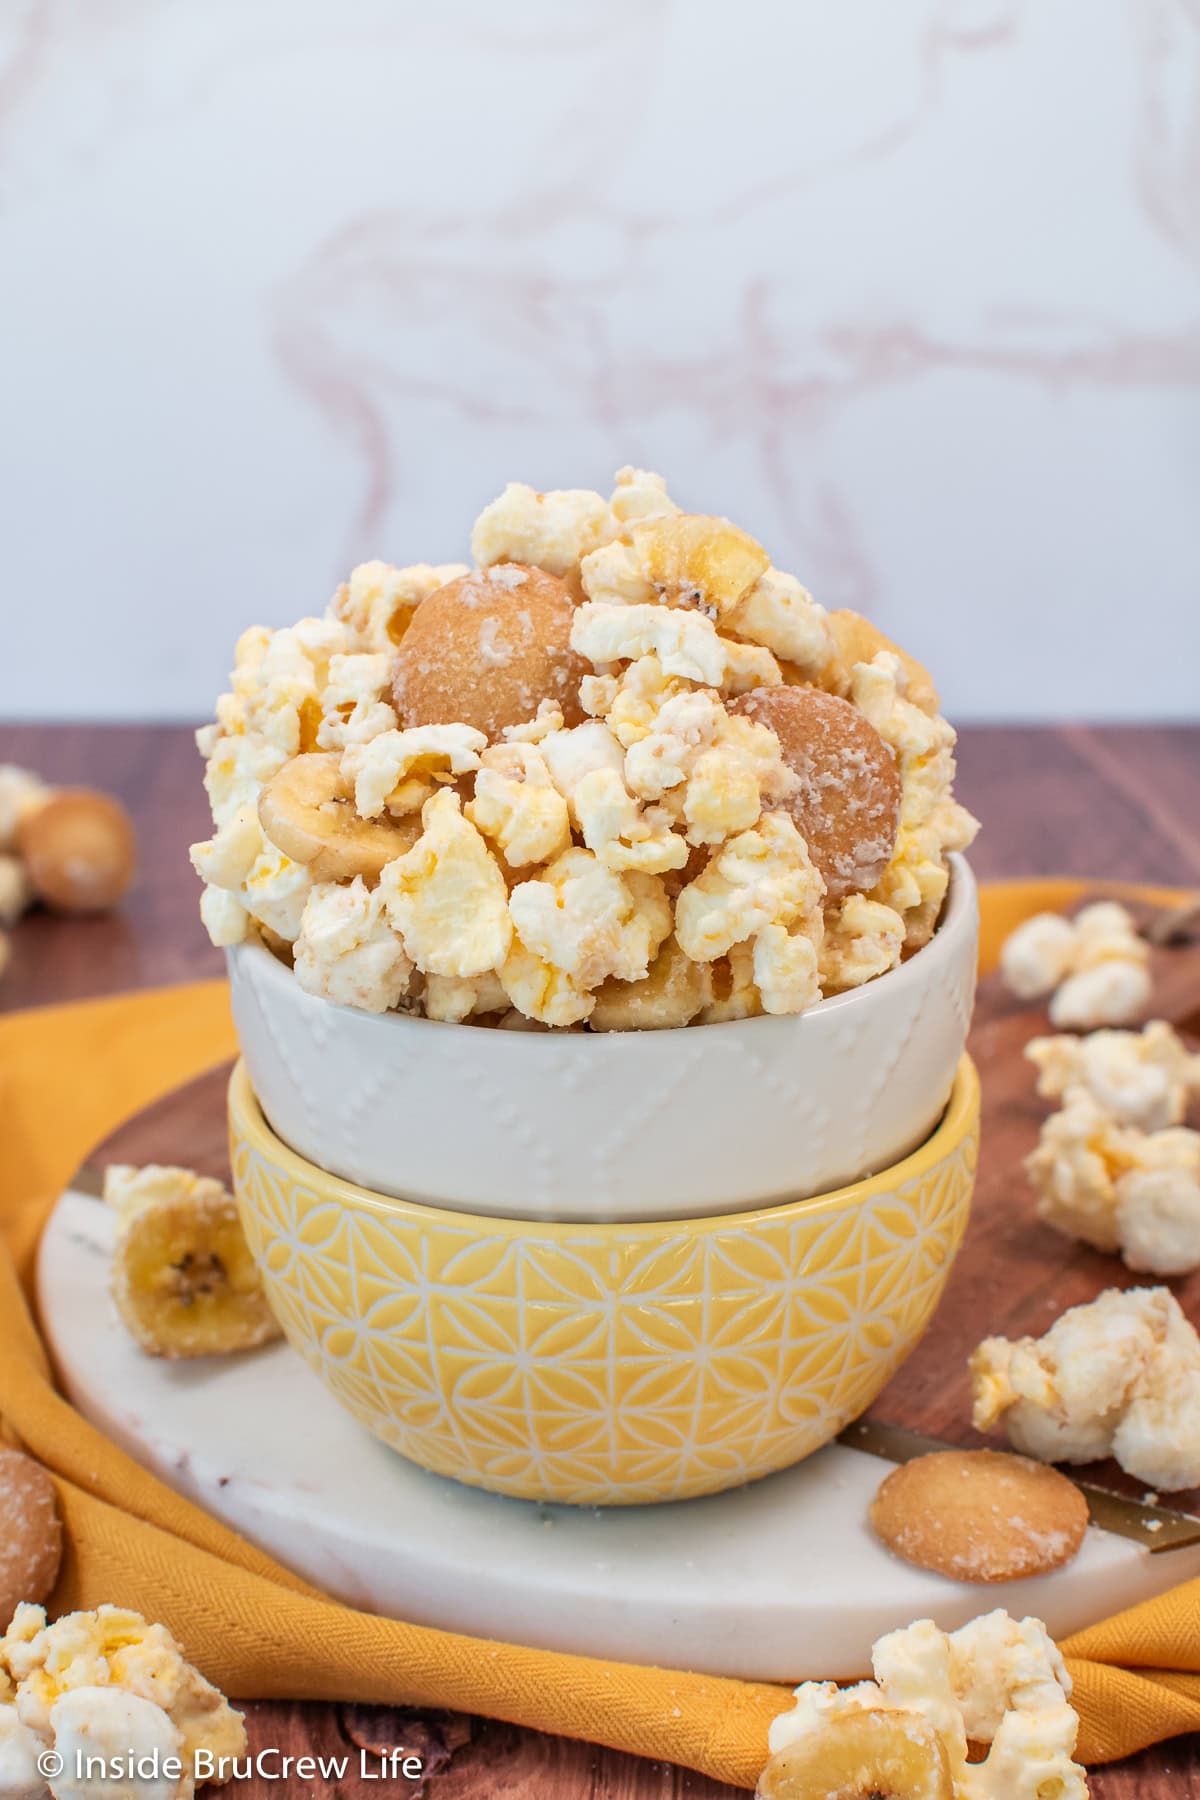 Chocolate covered popcorn in a bowl.